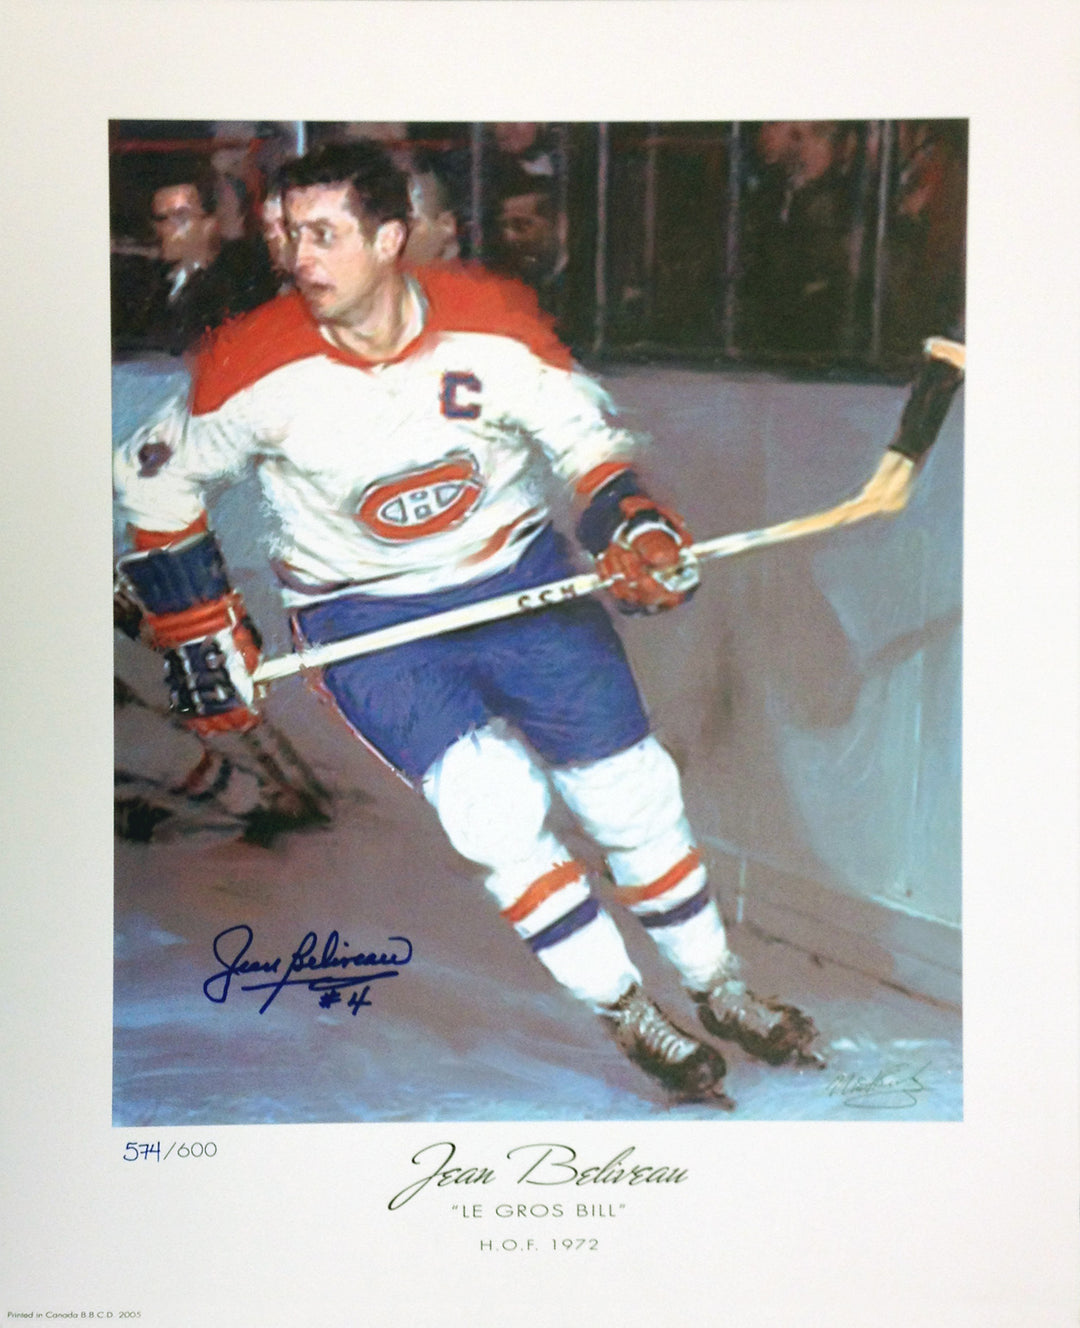 Jean Beliveau Autographed Limited Edition Lithograph Montreal Canadiens, Montreal Canadiens, NHL, Hockey, Autographed, Signed, AALCH30340